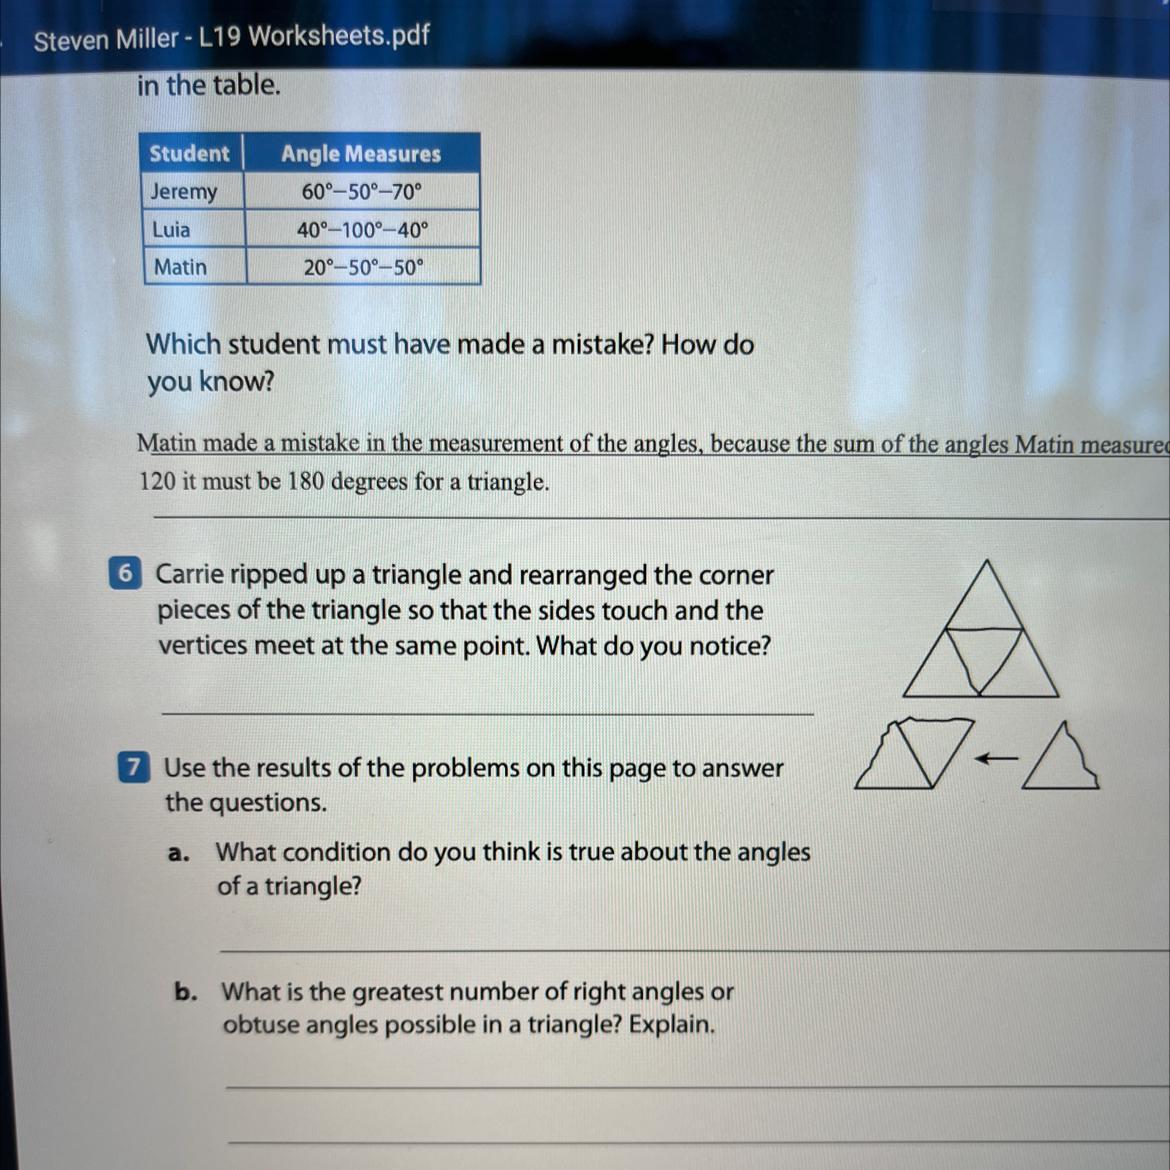 Can You Just Tell Me The Answer To This Problem I Need To Finish It Quickly I Dont Need To Work Lol Sorry